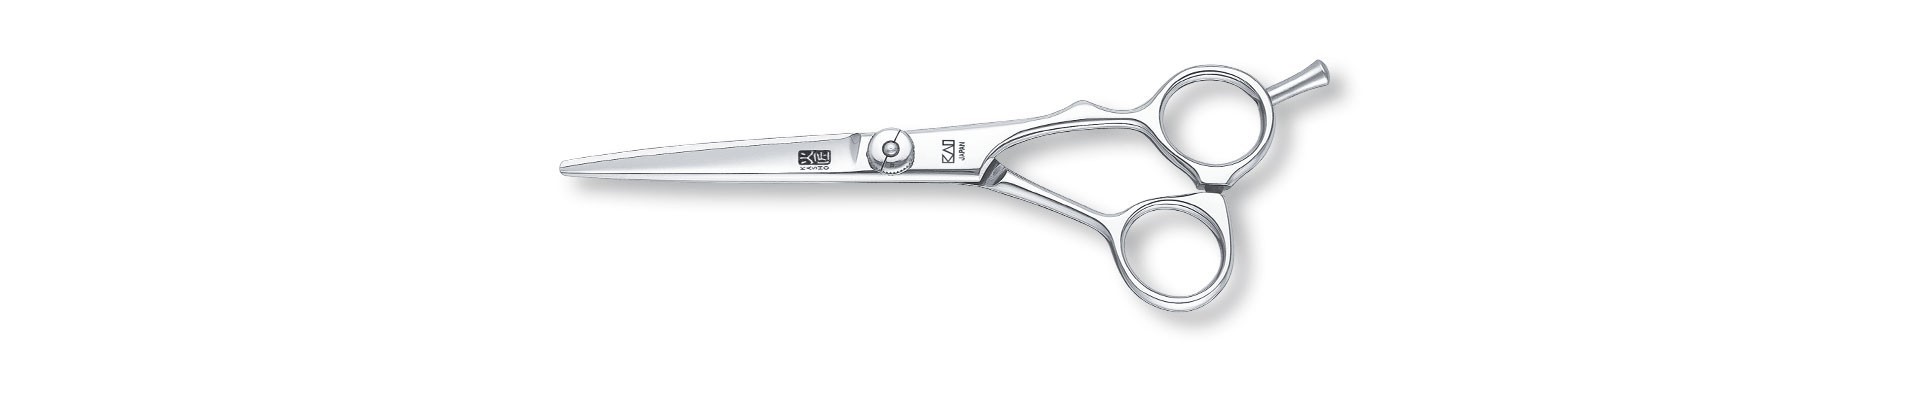 KASHO Green | professional hairdresser scissors and texturizers